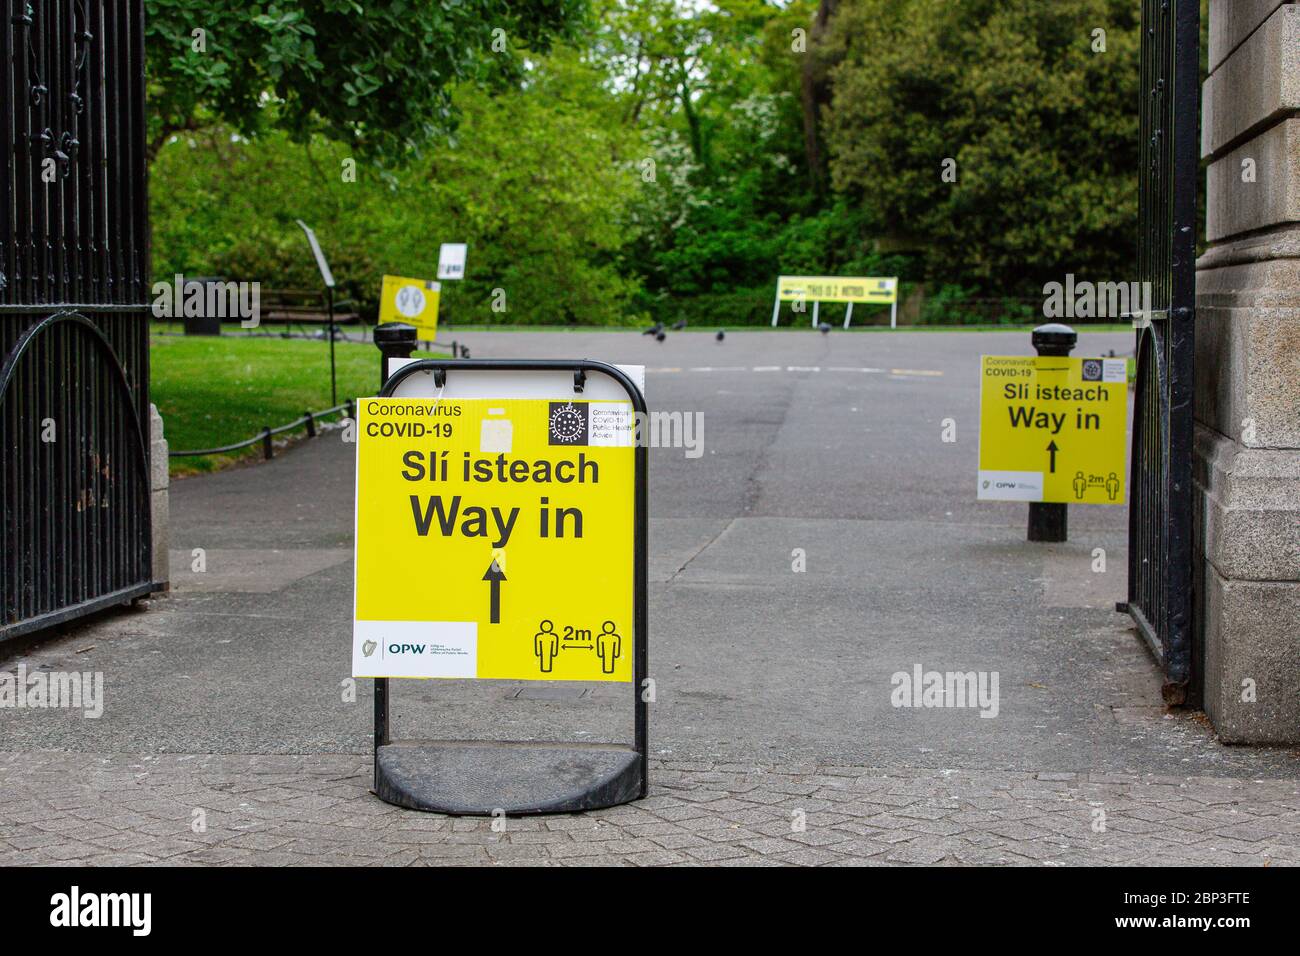 Dublin, Ireland. May 2020. Coronavirus Covid-19 yellow one way system signage at the entrance to the St Stephen's Green Park in Dublin. Stock Photo